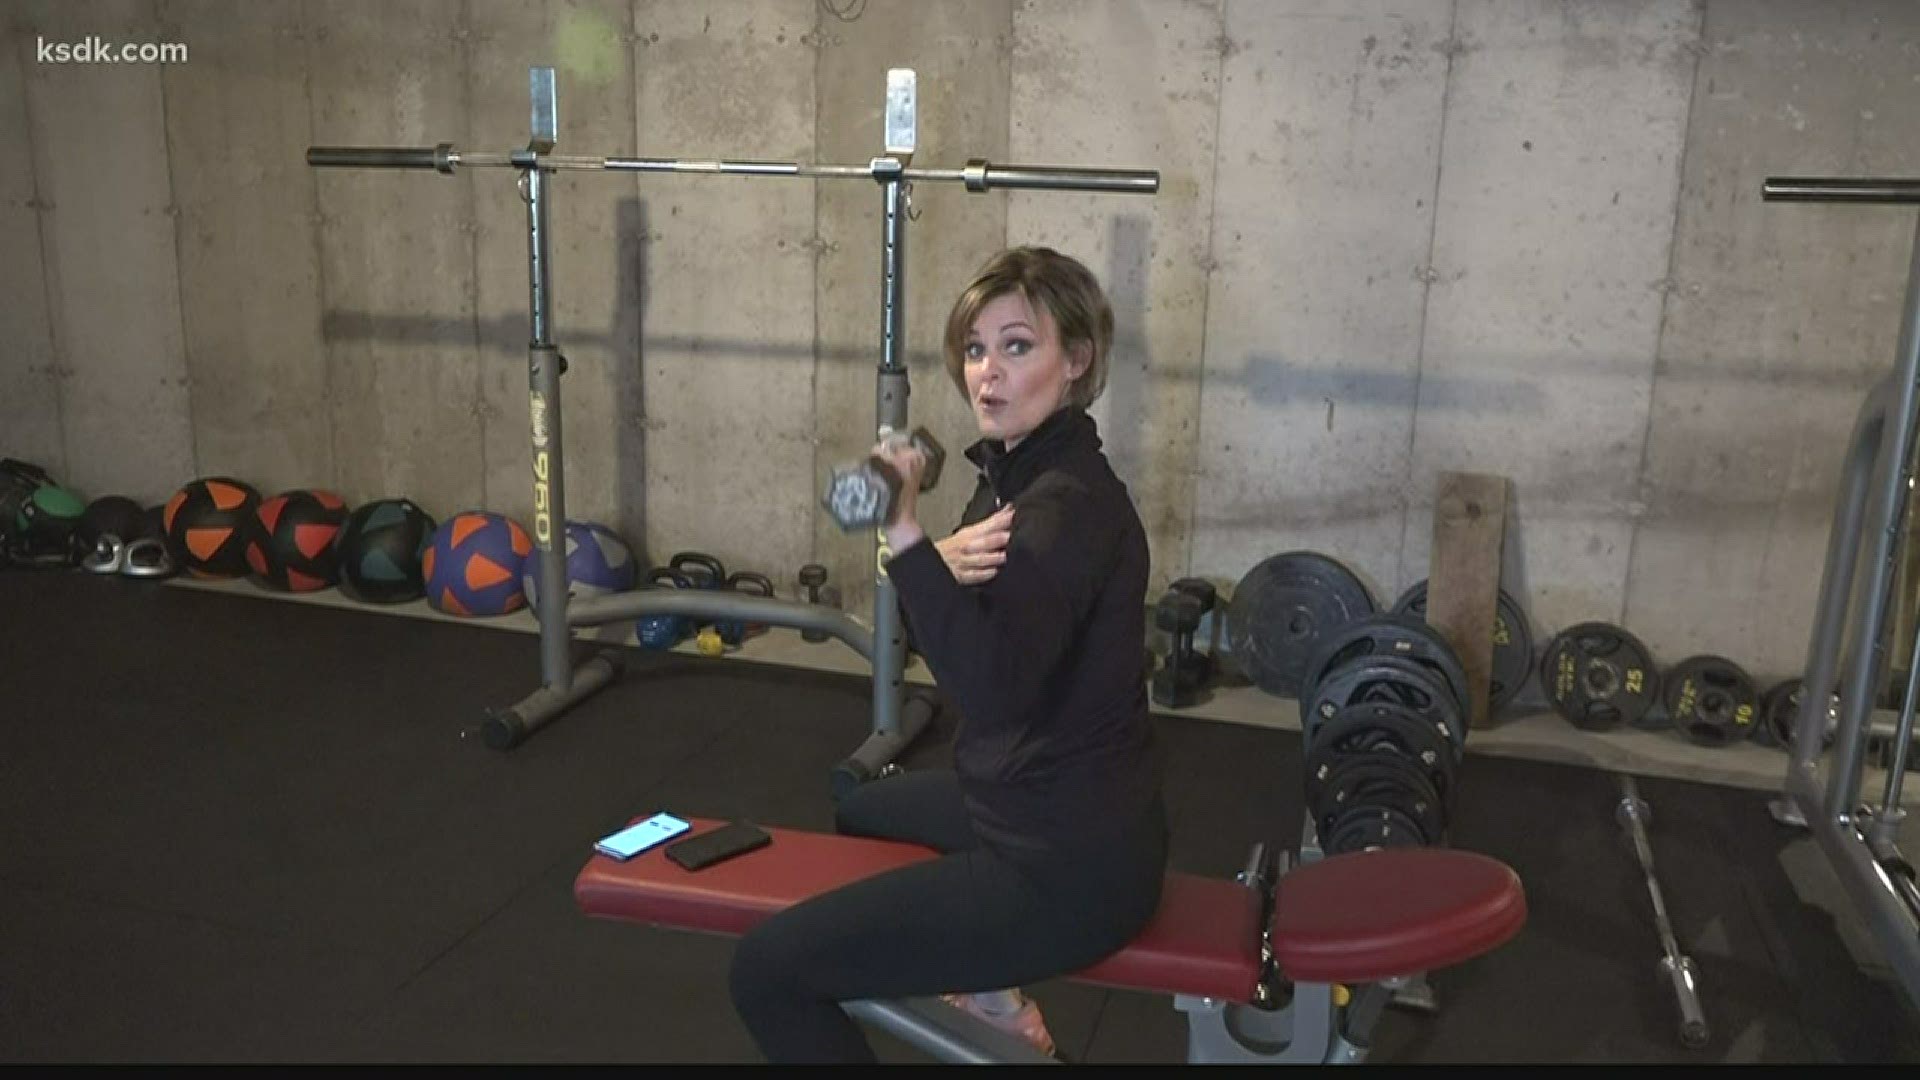 Monica demonstrates some safe, effective exercises for your back.